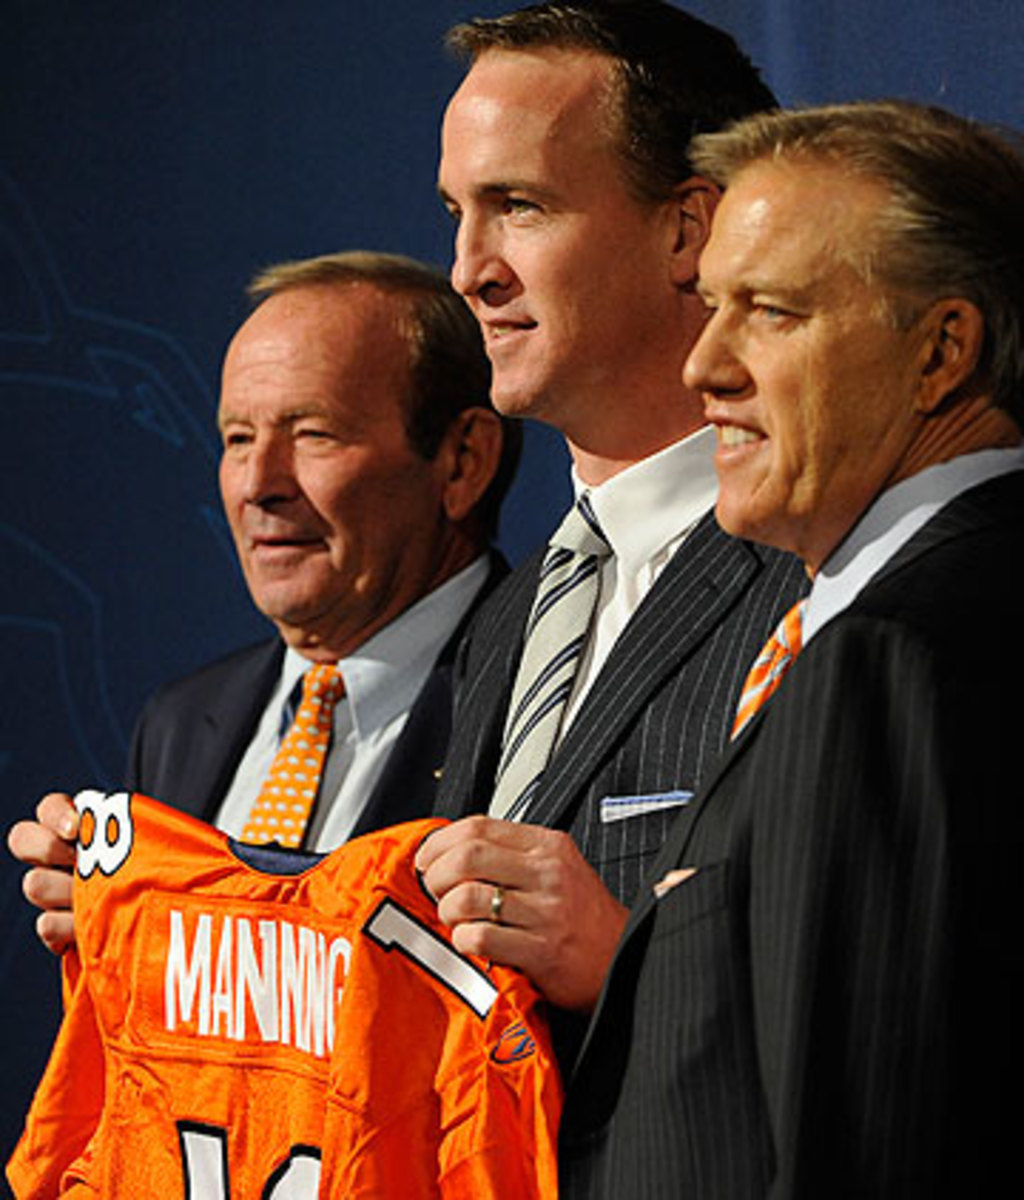 Denver's direction changed course when Peyton Manning told Pat Bowlen and John Elway he was signing with the Broncos. (Joe Amon/Getty Images)